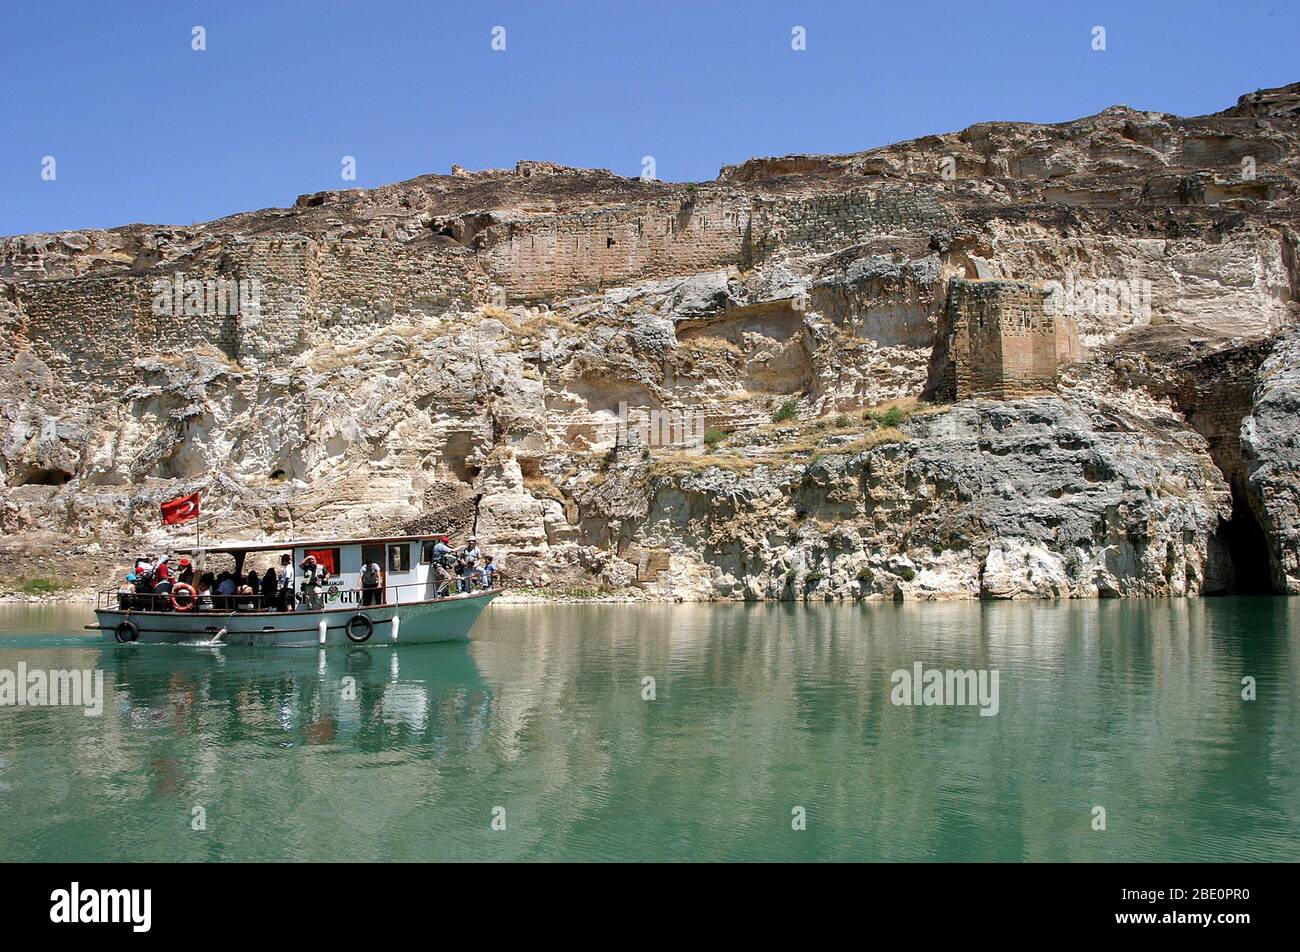 FIRAT RIVER, TURKEY - JANUARY 06: River boat in front of abandoned castle (Rum Kale) in Firat River (Euphrates River) on January 06, 2000 in Gaziantep, Turkey. Stock Photo